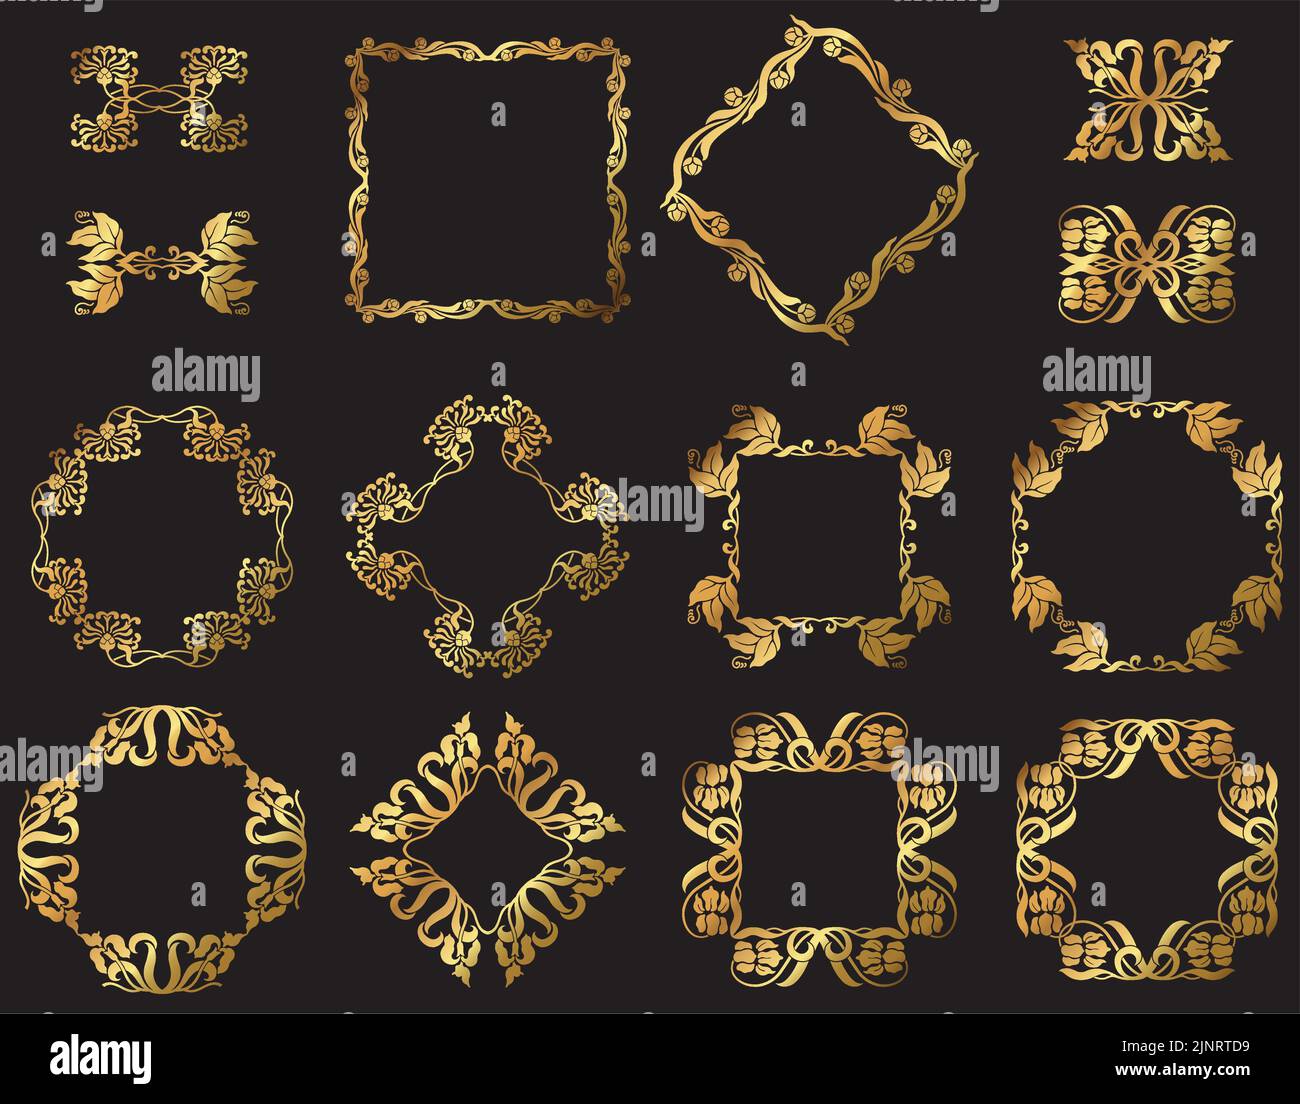 A set of vintage vector gold floral decorative borders and frames. Stock Vector